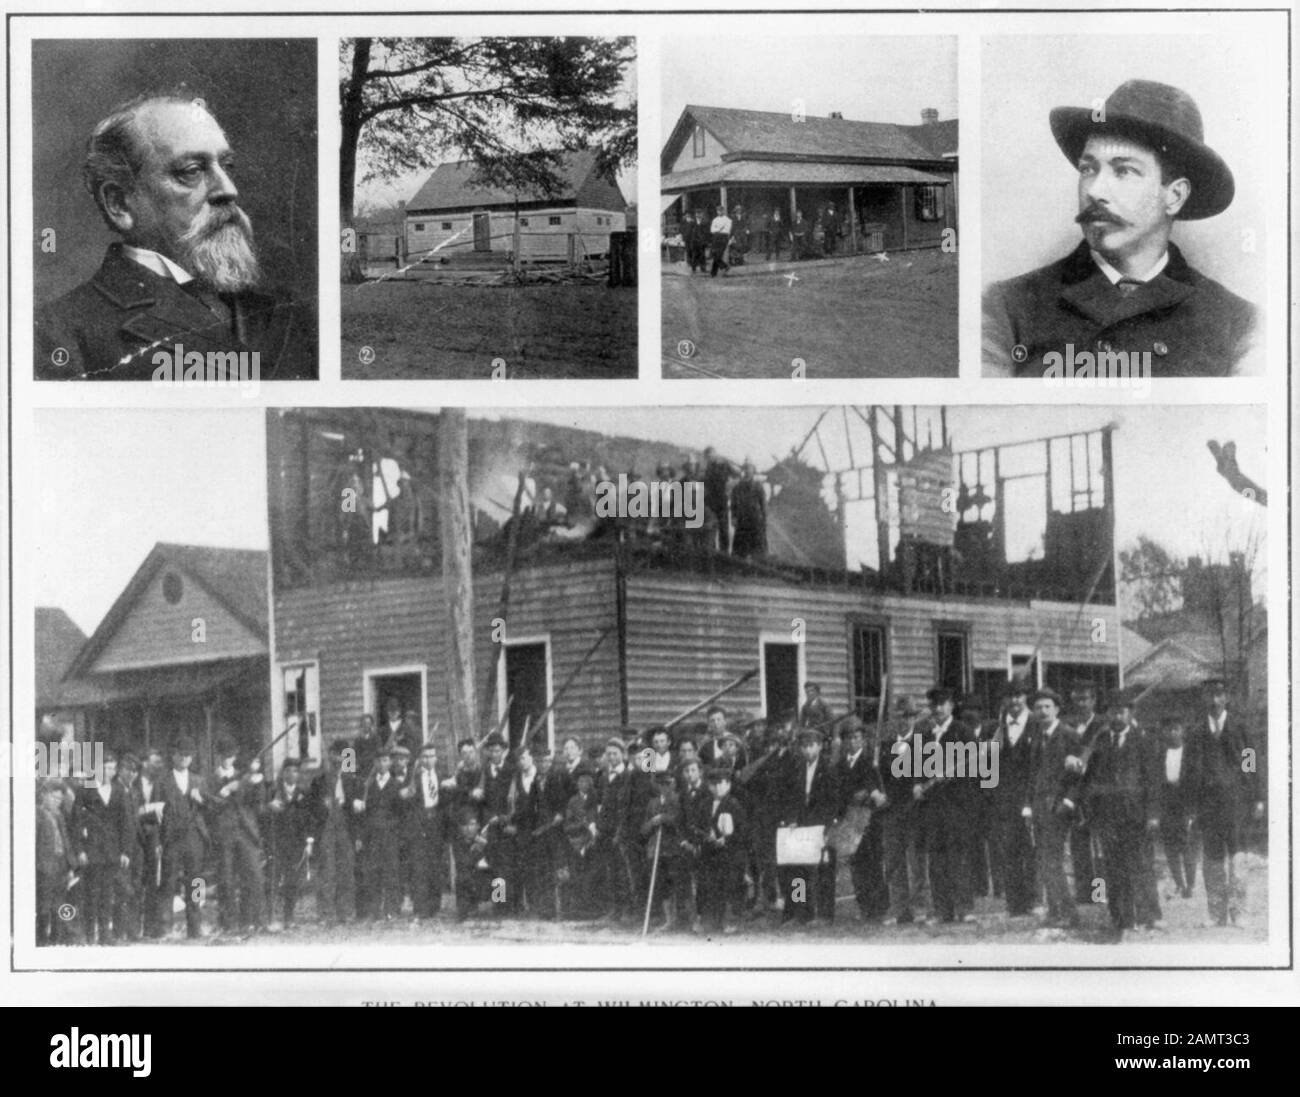 [Wilmington, N.C. race riot, 1898: montage of 5 photos: (1) Alfred M. Waddell; (2) Manhattan Park, where shooting took place; (3) 4th and Harnet, where first Negroes fell; (4) E.G. Parmalee, new chief of police (5) The wrecked Record building and group of vigilantes]; 26 November 1898; https://www..gov/pictures/item/2006680061/     Â   This image  is available from the United States 's Prints and Photographs division under the digital ID cph.3a51950.This tag does not indicate the copyright status of the attached work. A normal copyright tag is still required. See Stock Photo